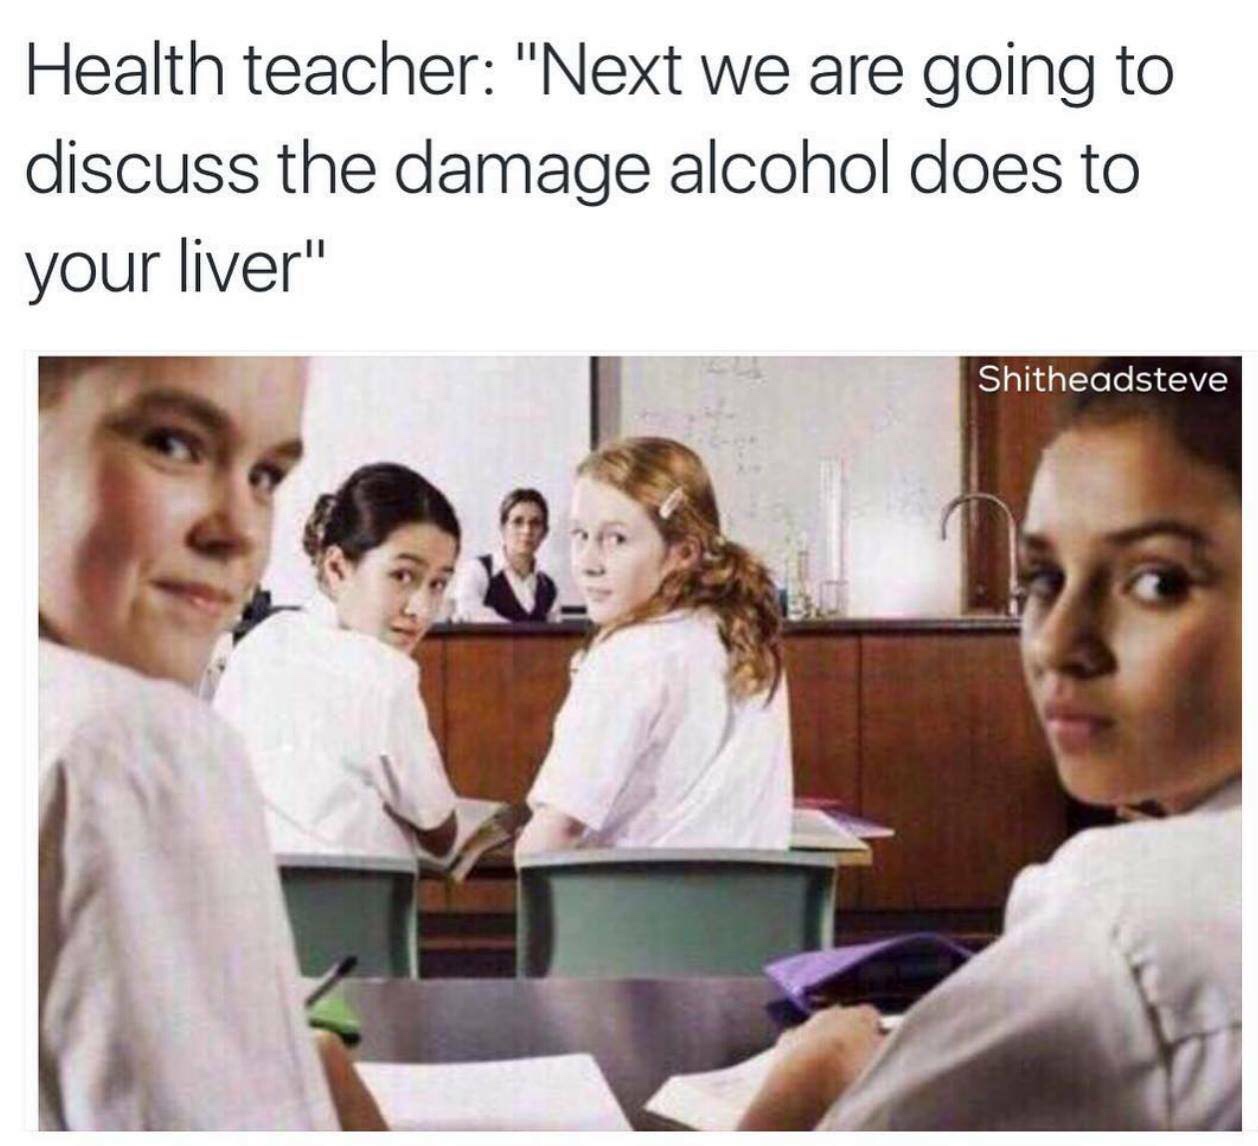 next we are going to discuss the damage alcohol does to your liver - Health teacher "Next we are going to discuss the damage alcohol does to your liver" Shitheadsteve